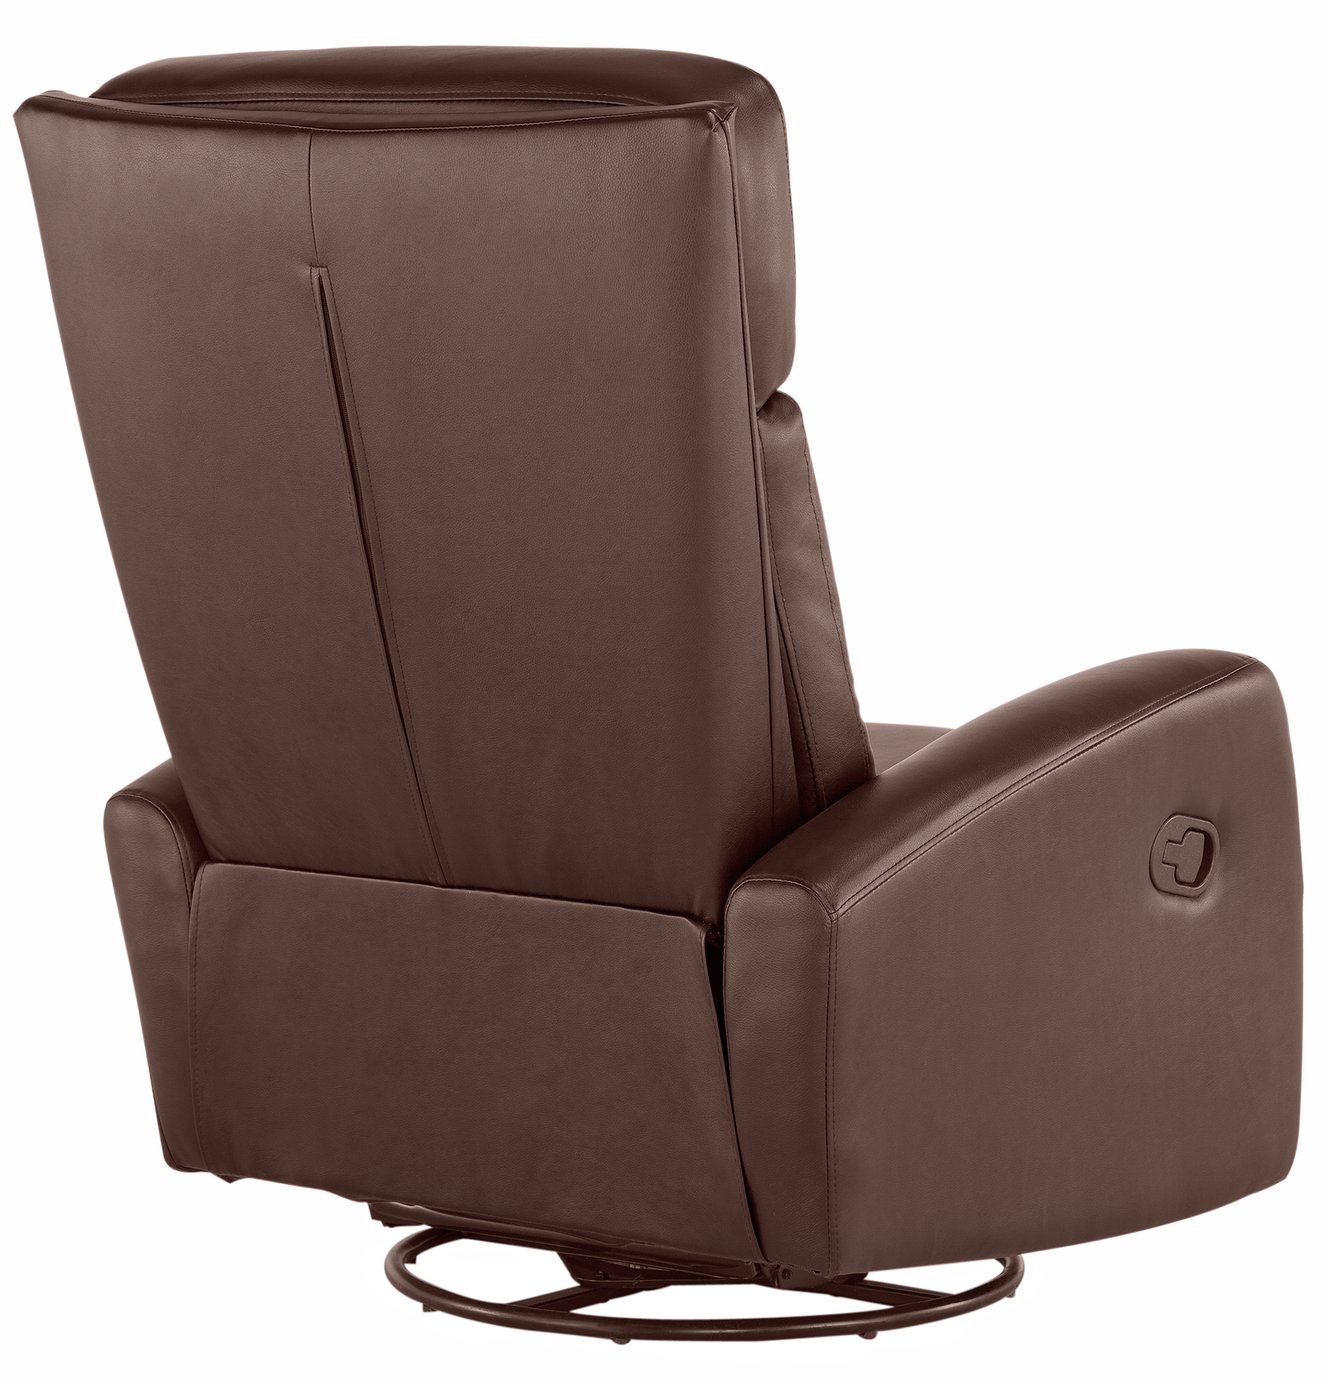 Argos Home Rock-R-Round - Leather Eff - Recliner Chair - Choc Reviews